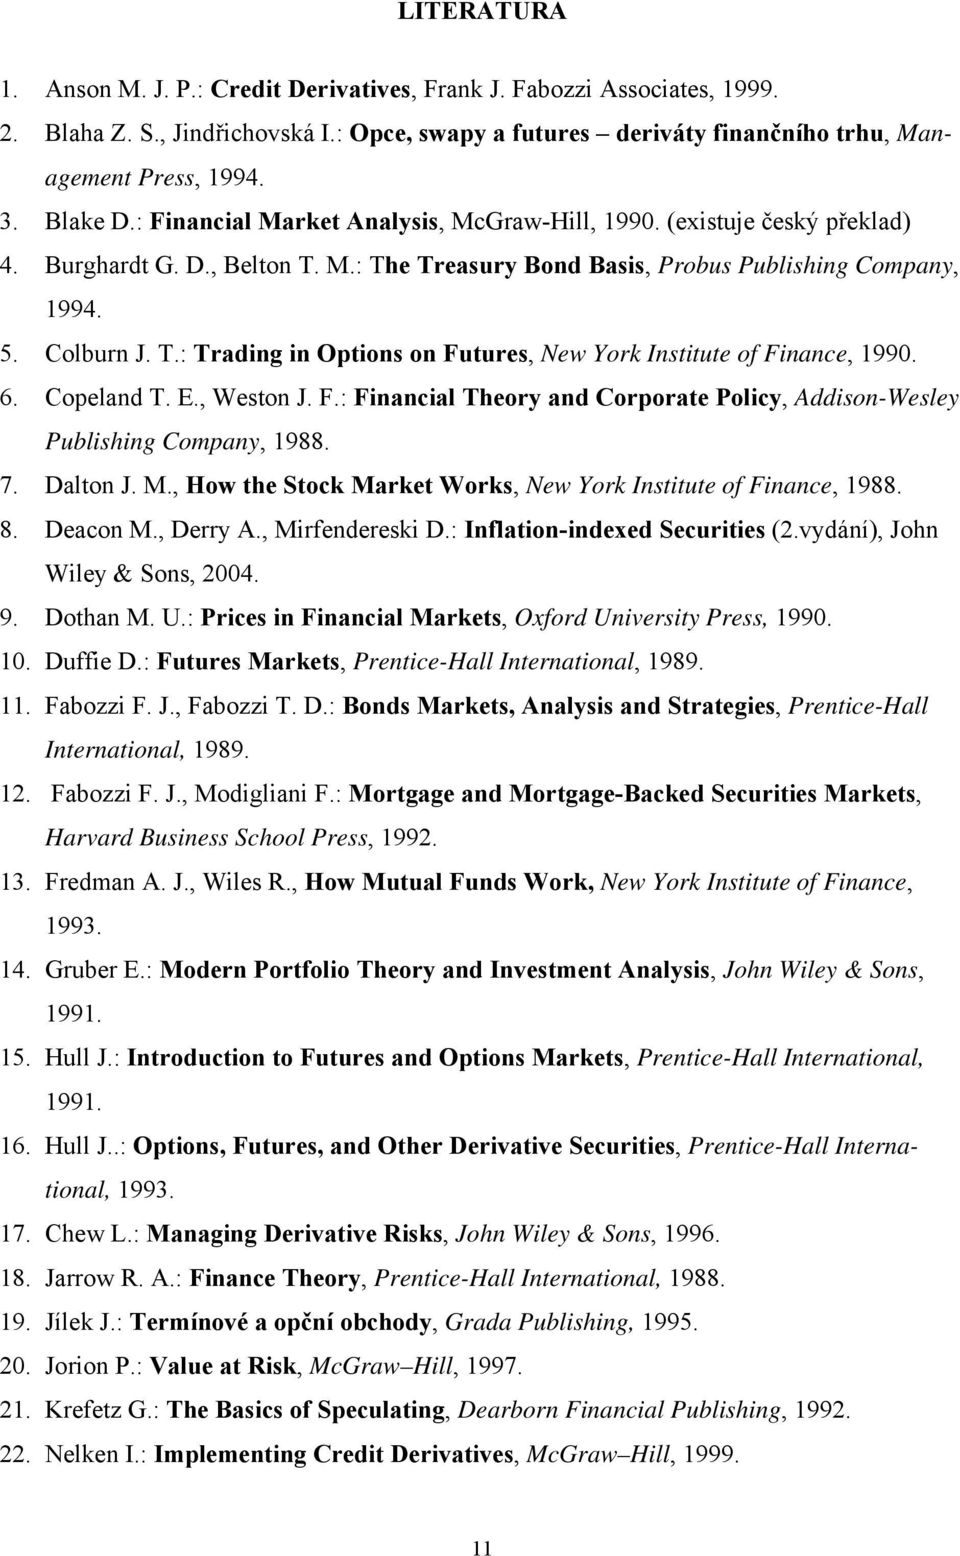 6. Copeland T. E., Weston J. F.: Financial Theory and Corporate Policy, Addison-Wesley Publishing Company, 1988. 7. Dalton J. M., How the Stock Market Works, New York Institute of Finance, 1988. 8.